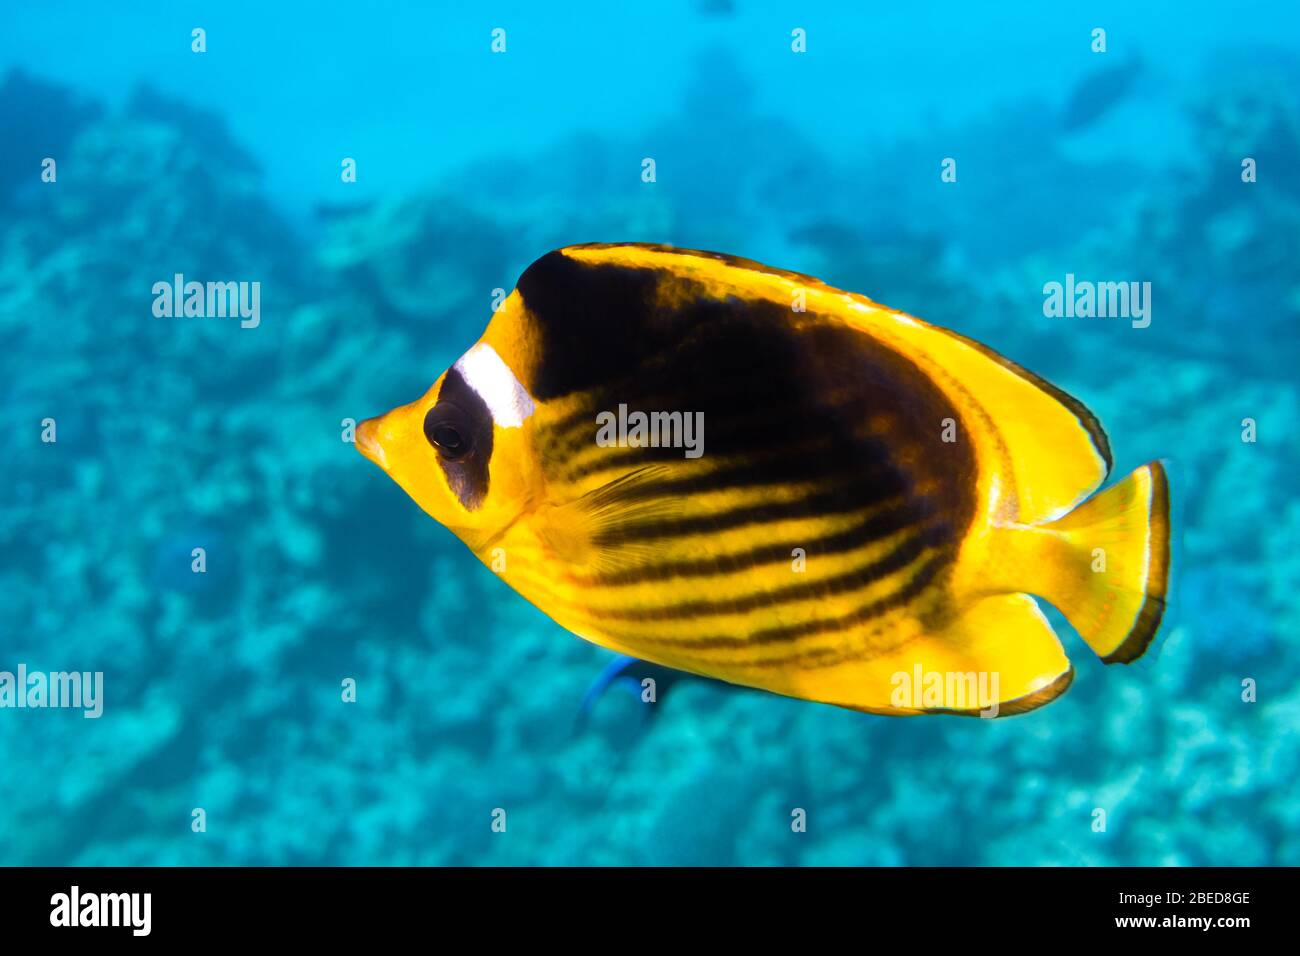 Raccoon Butterflyfish (Chaetodon lunula), Clear Blue Turquoise Water. Colorful Tropical Coral Fish In The Ocean. Yellow Stripped Saltwater Butterfly F Stock Photo